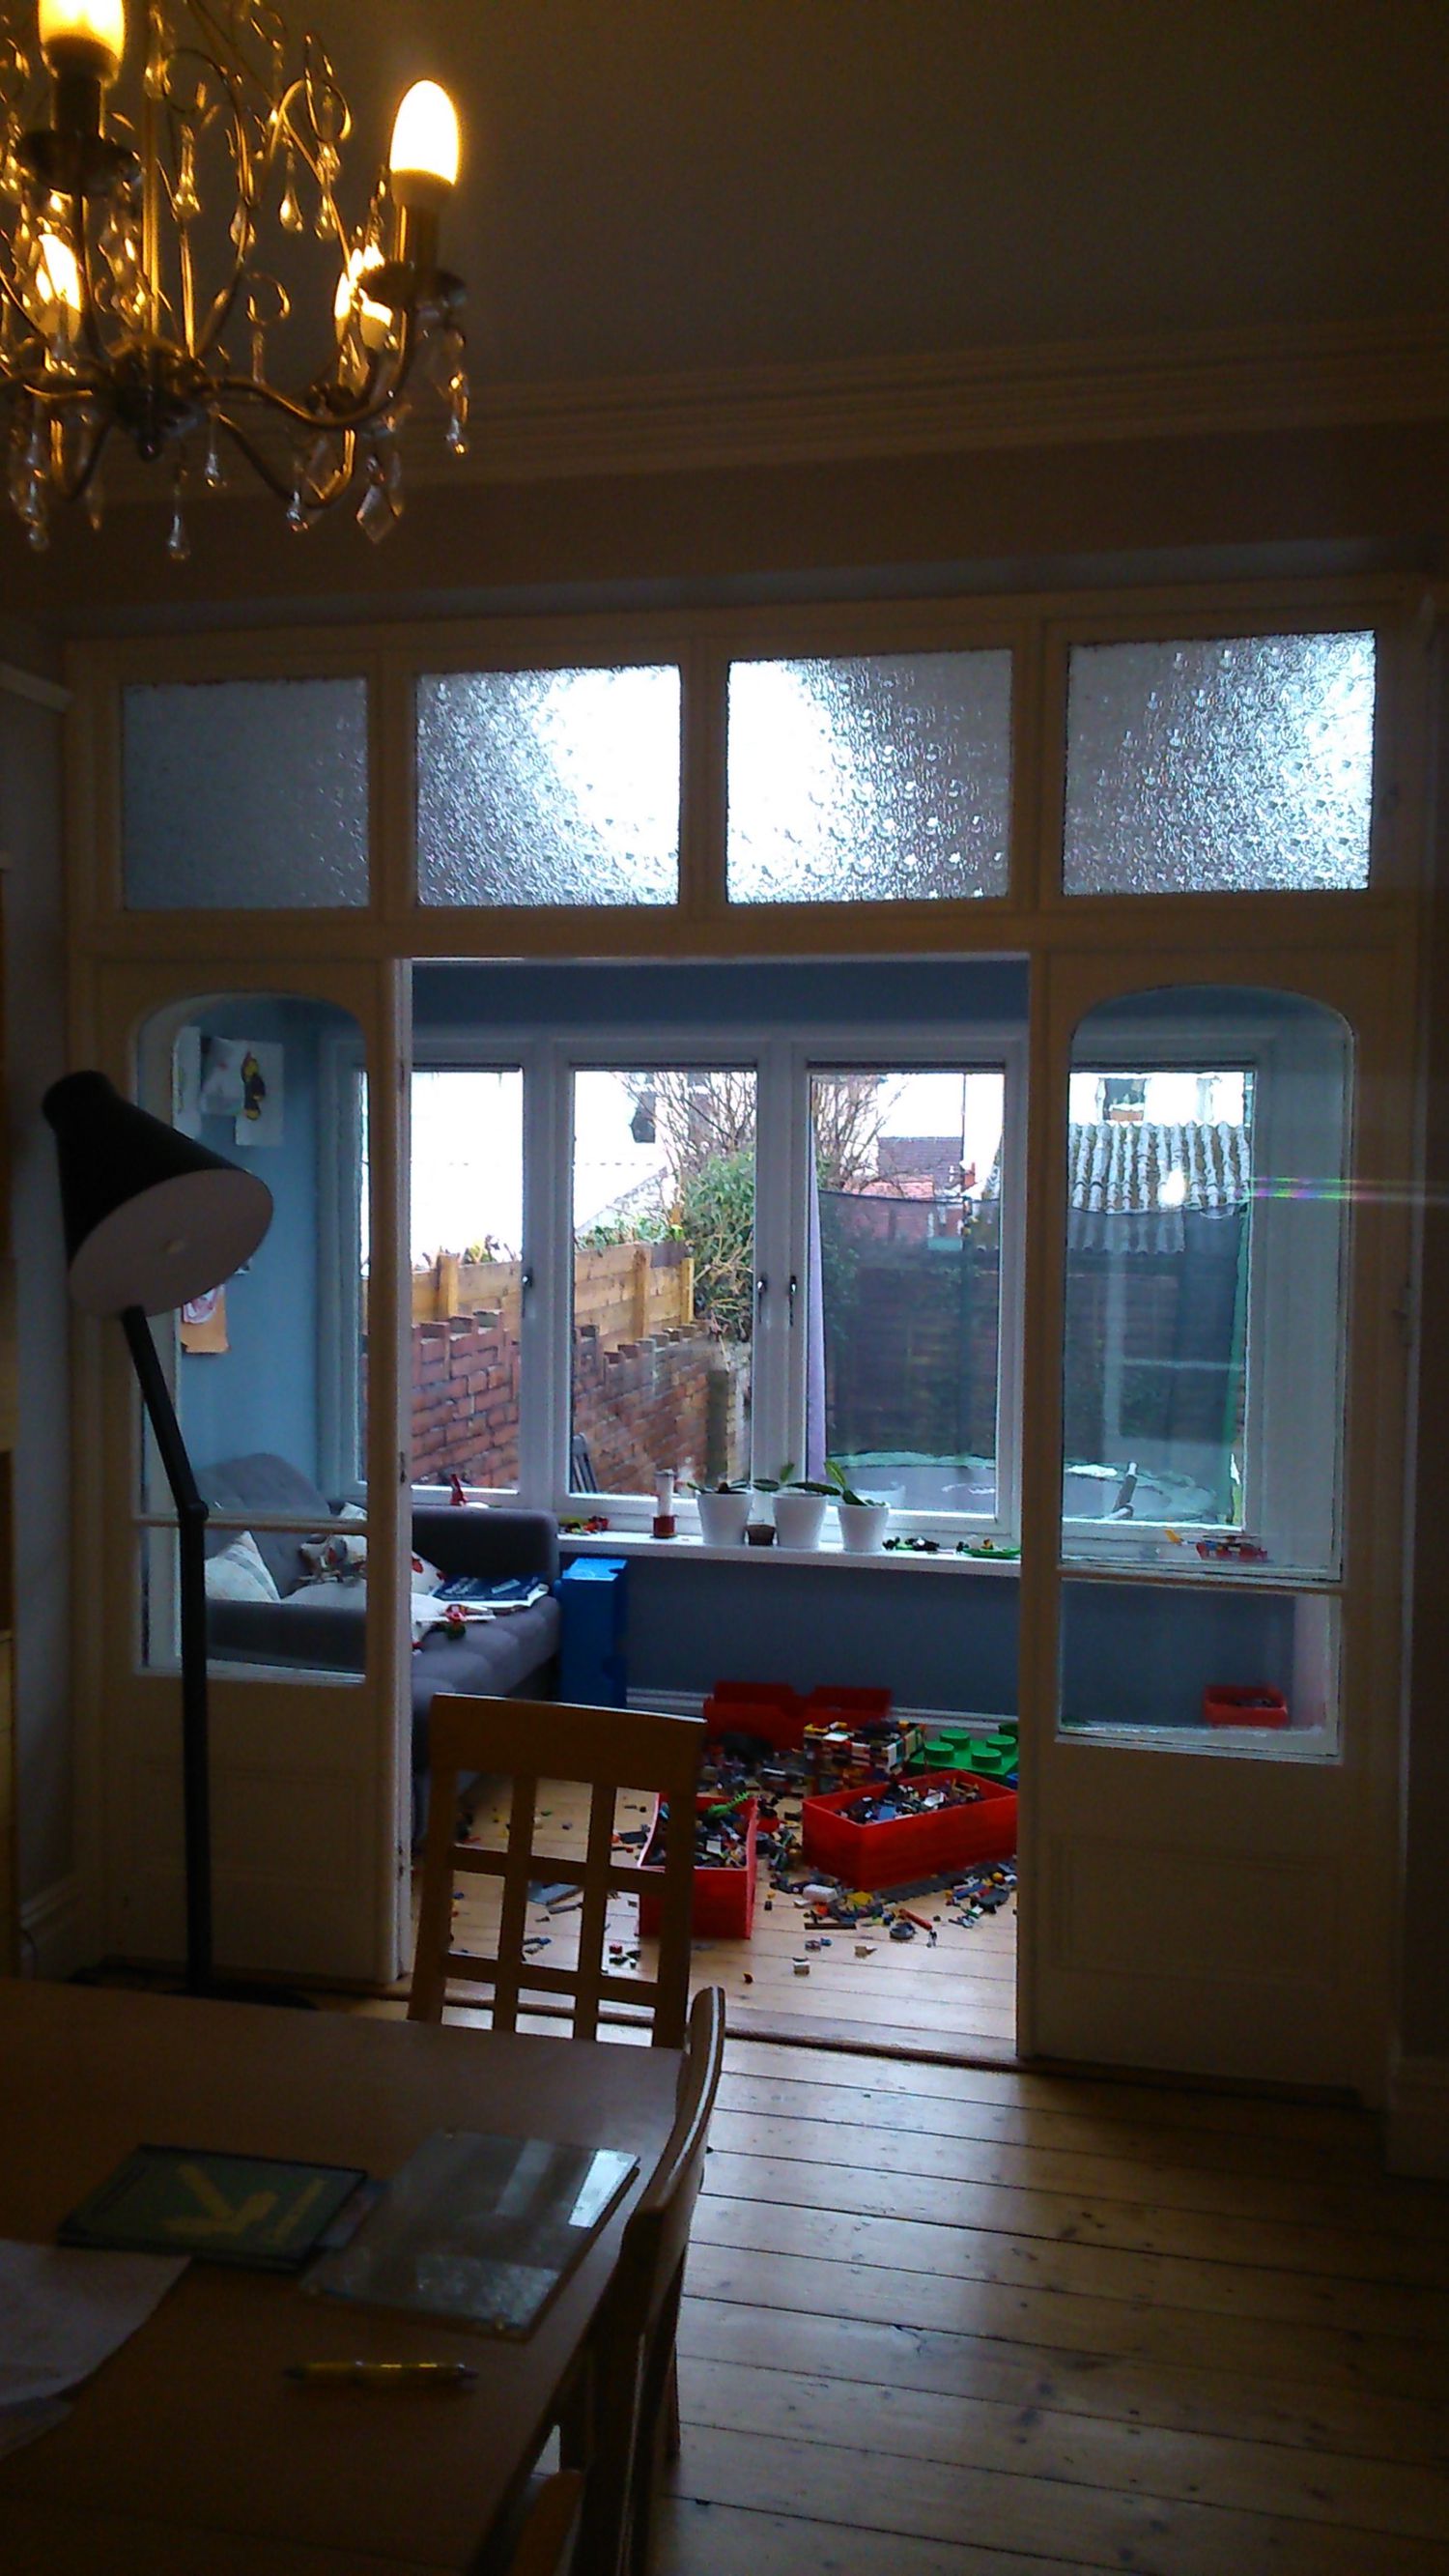 The room before had internal doors leading to the conservatory.